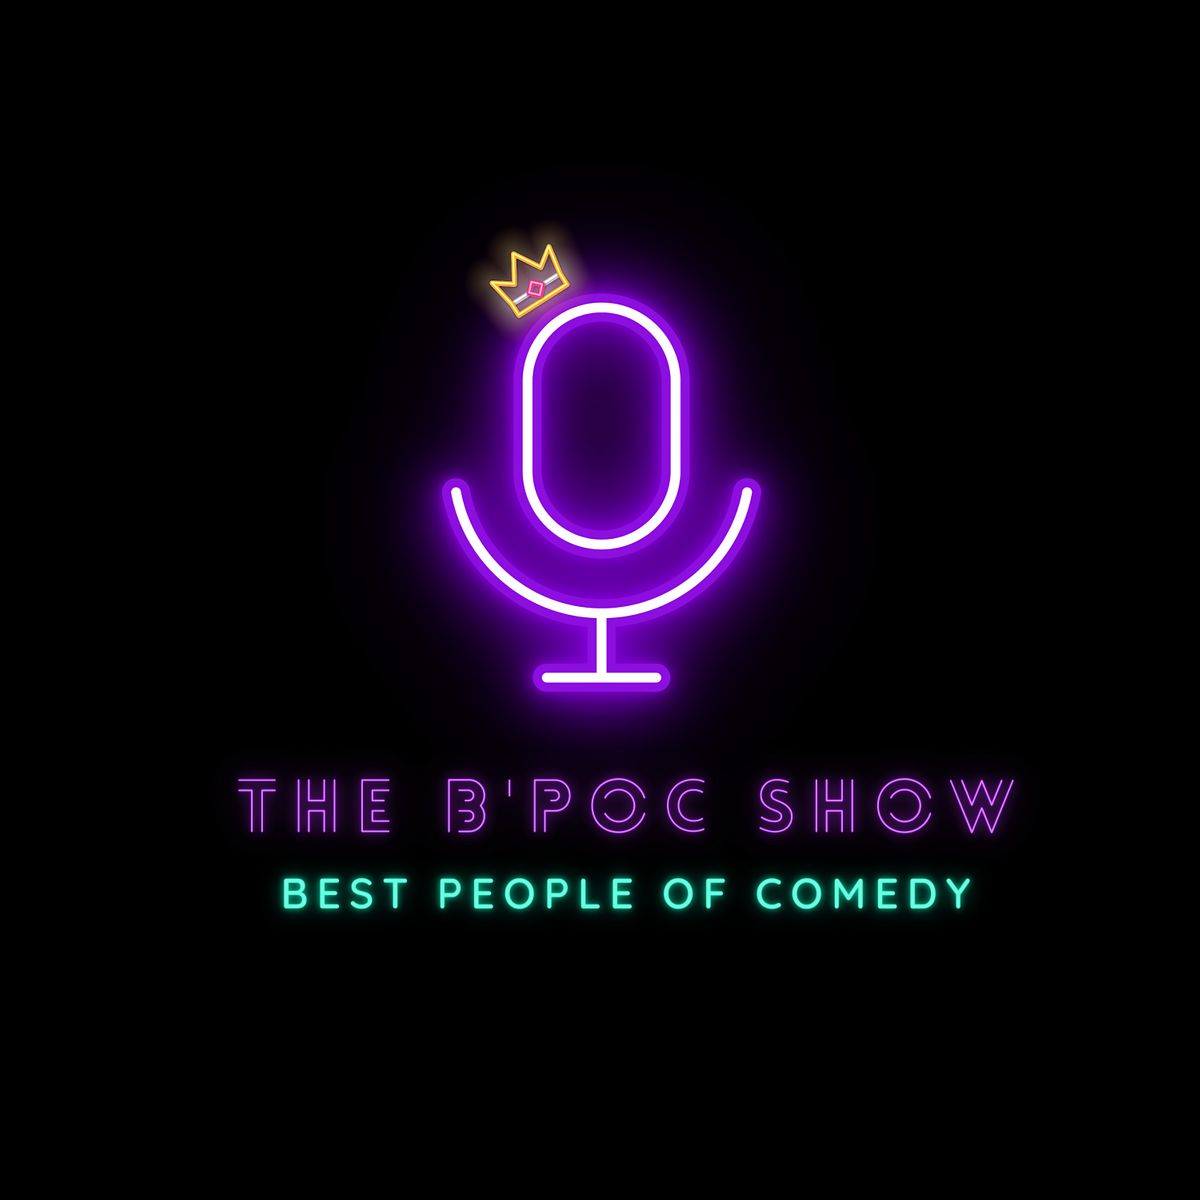 The Best People of Comedy Show (B'POC Show) : Bak 2 Skool Edition